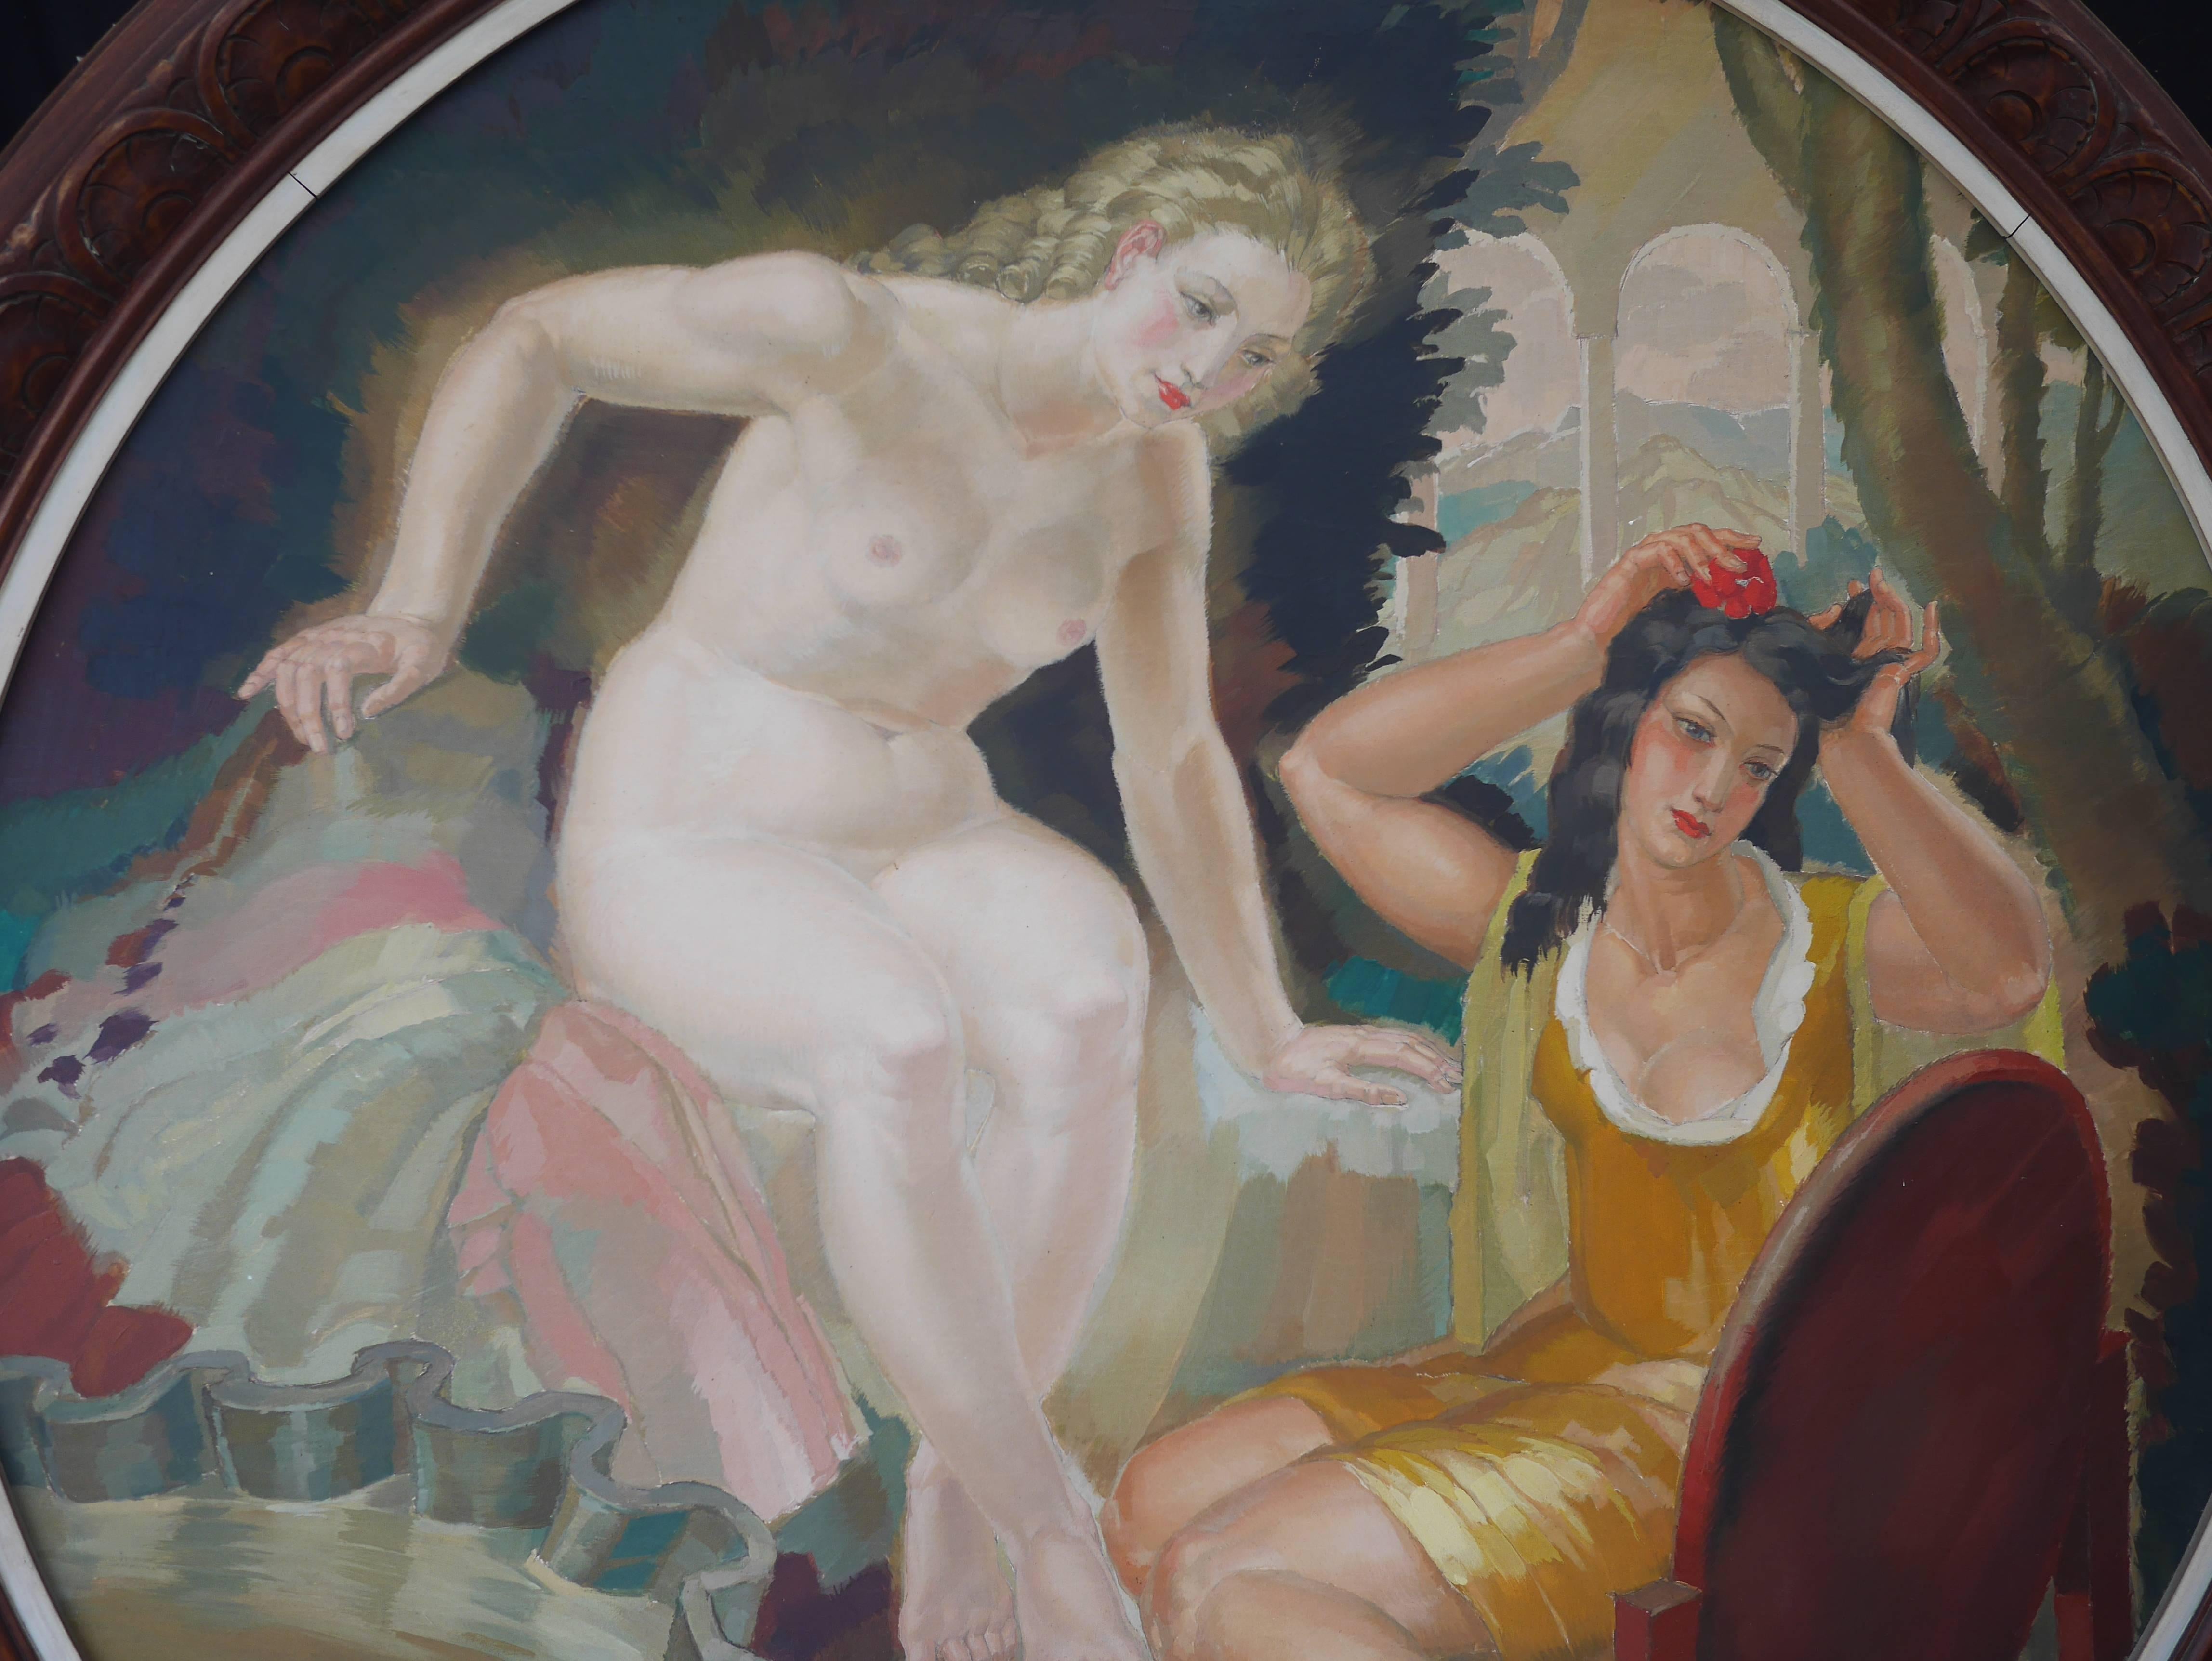 J. André Caverne (Active in the early 20th century)
Painter decorator from Bordeaux - France
Young women at her toilet
Oil on round panel
120.5 cm diameter - 145cm with frame
Signed A. Cave on the lower right.